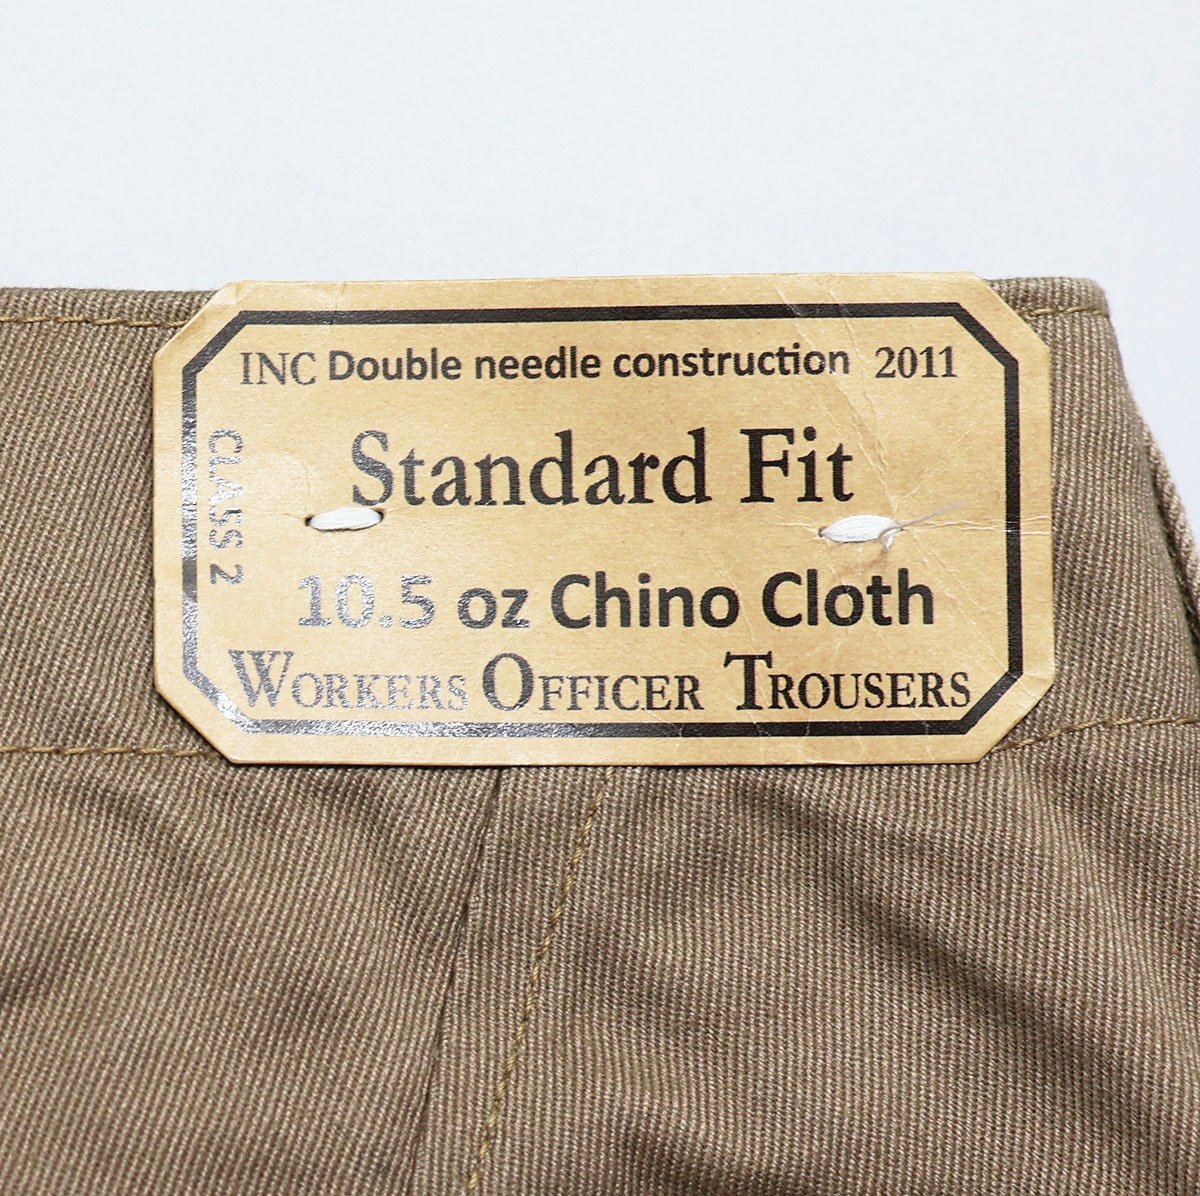 Workers K&T H MFG Co (ワーカーズ) Officer Trousers Standard Fit Type 2 / オフィサートラウザー タイプ2 未使用品 Beige Chino w34_画像9